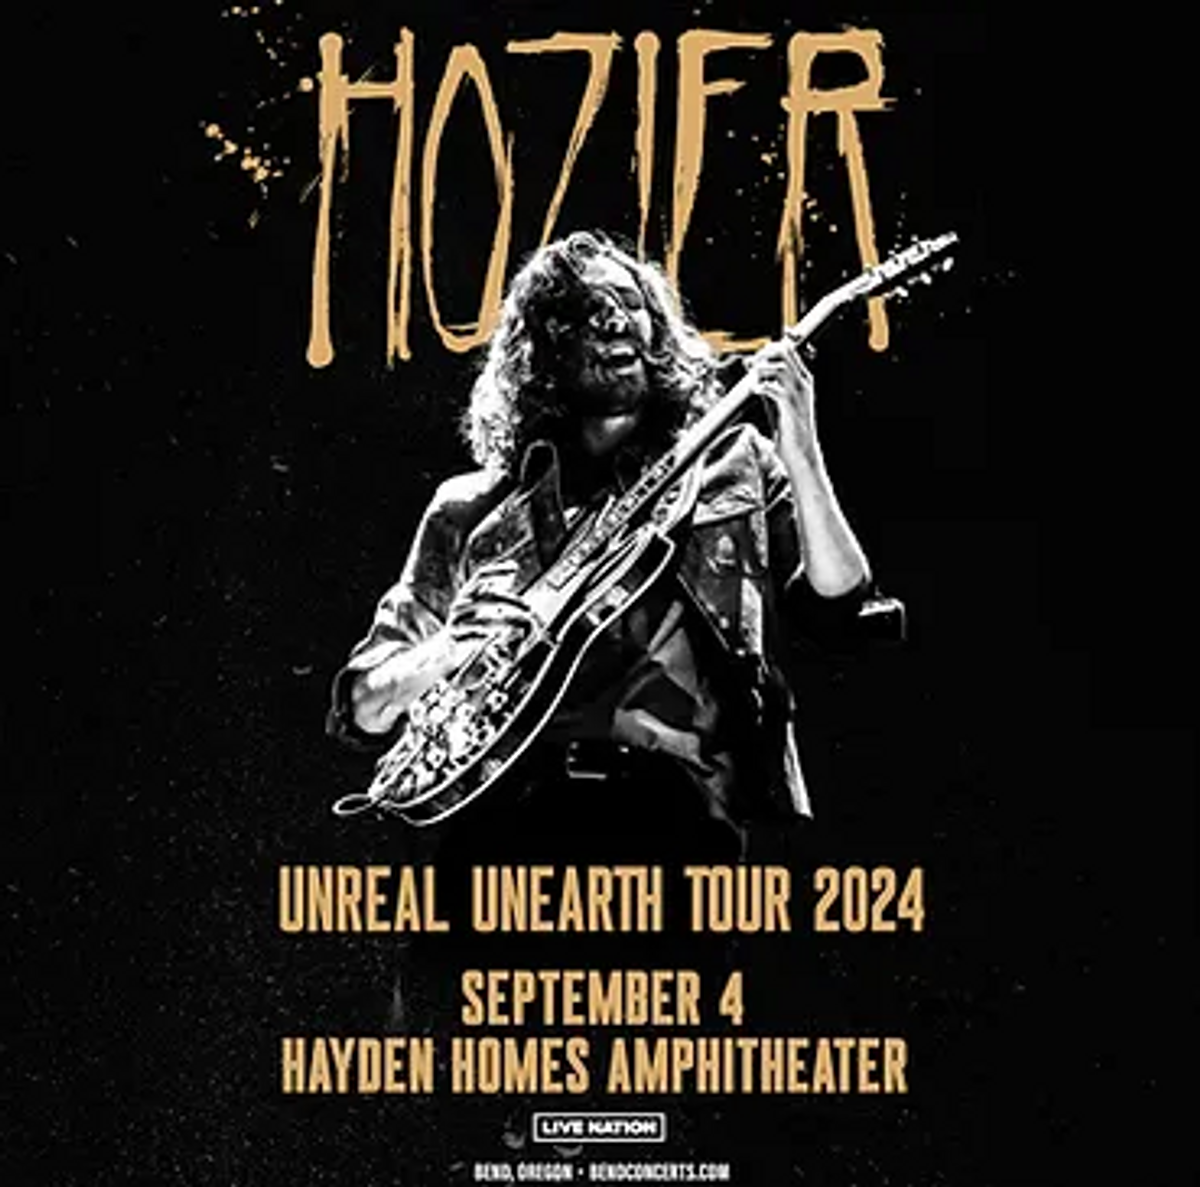 Hozier Unreal Unearth Tour 2024 at Hayden Homes Amphitheater in Bend